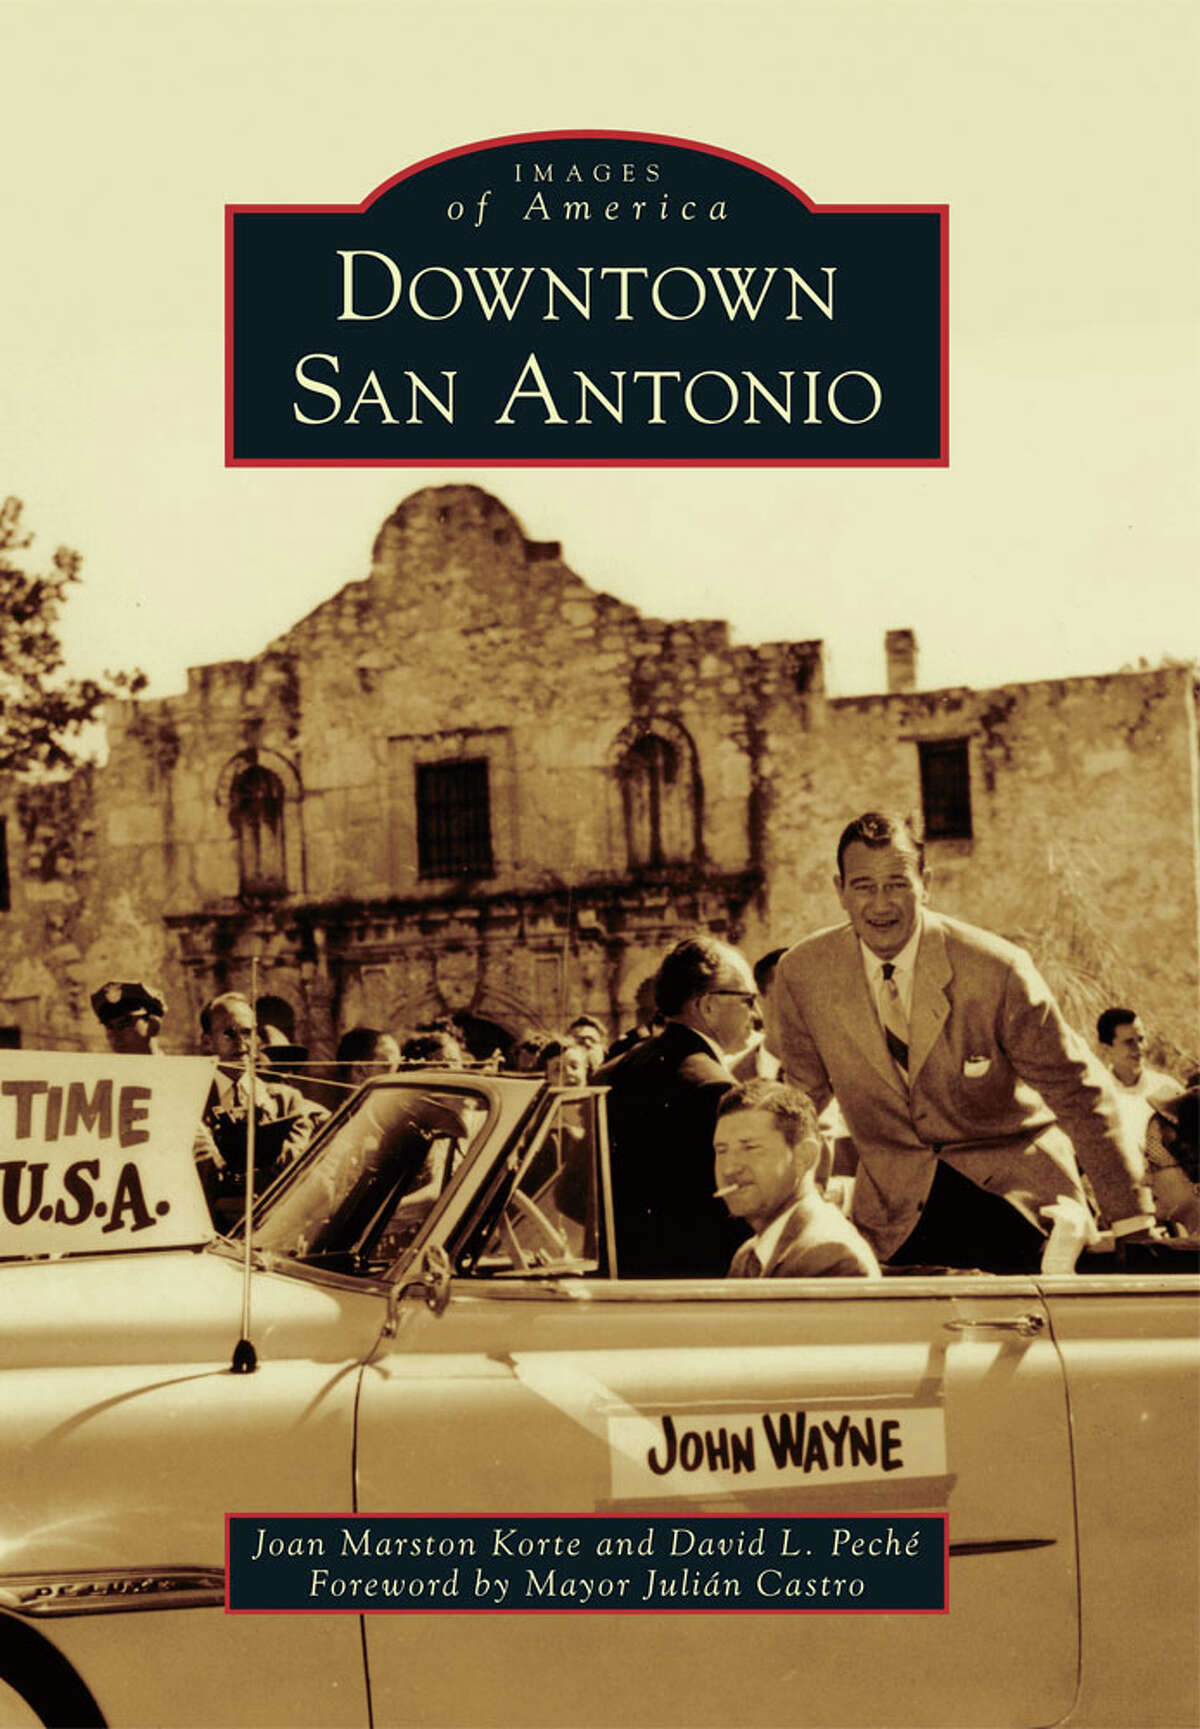 "Downtown San Antonio" is a new book of historic photos by local amateur historians Joan Marston Korte and David L. Peche.